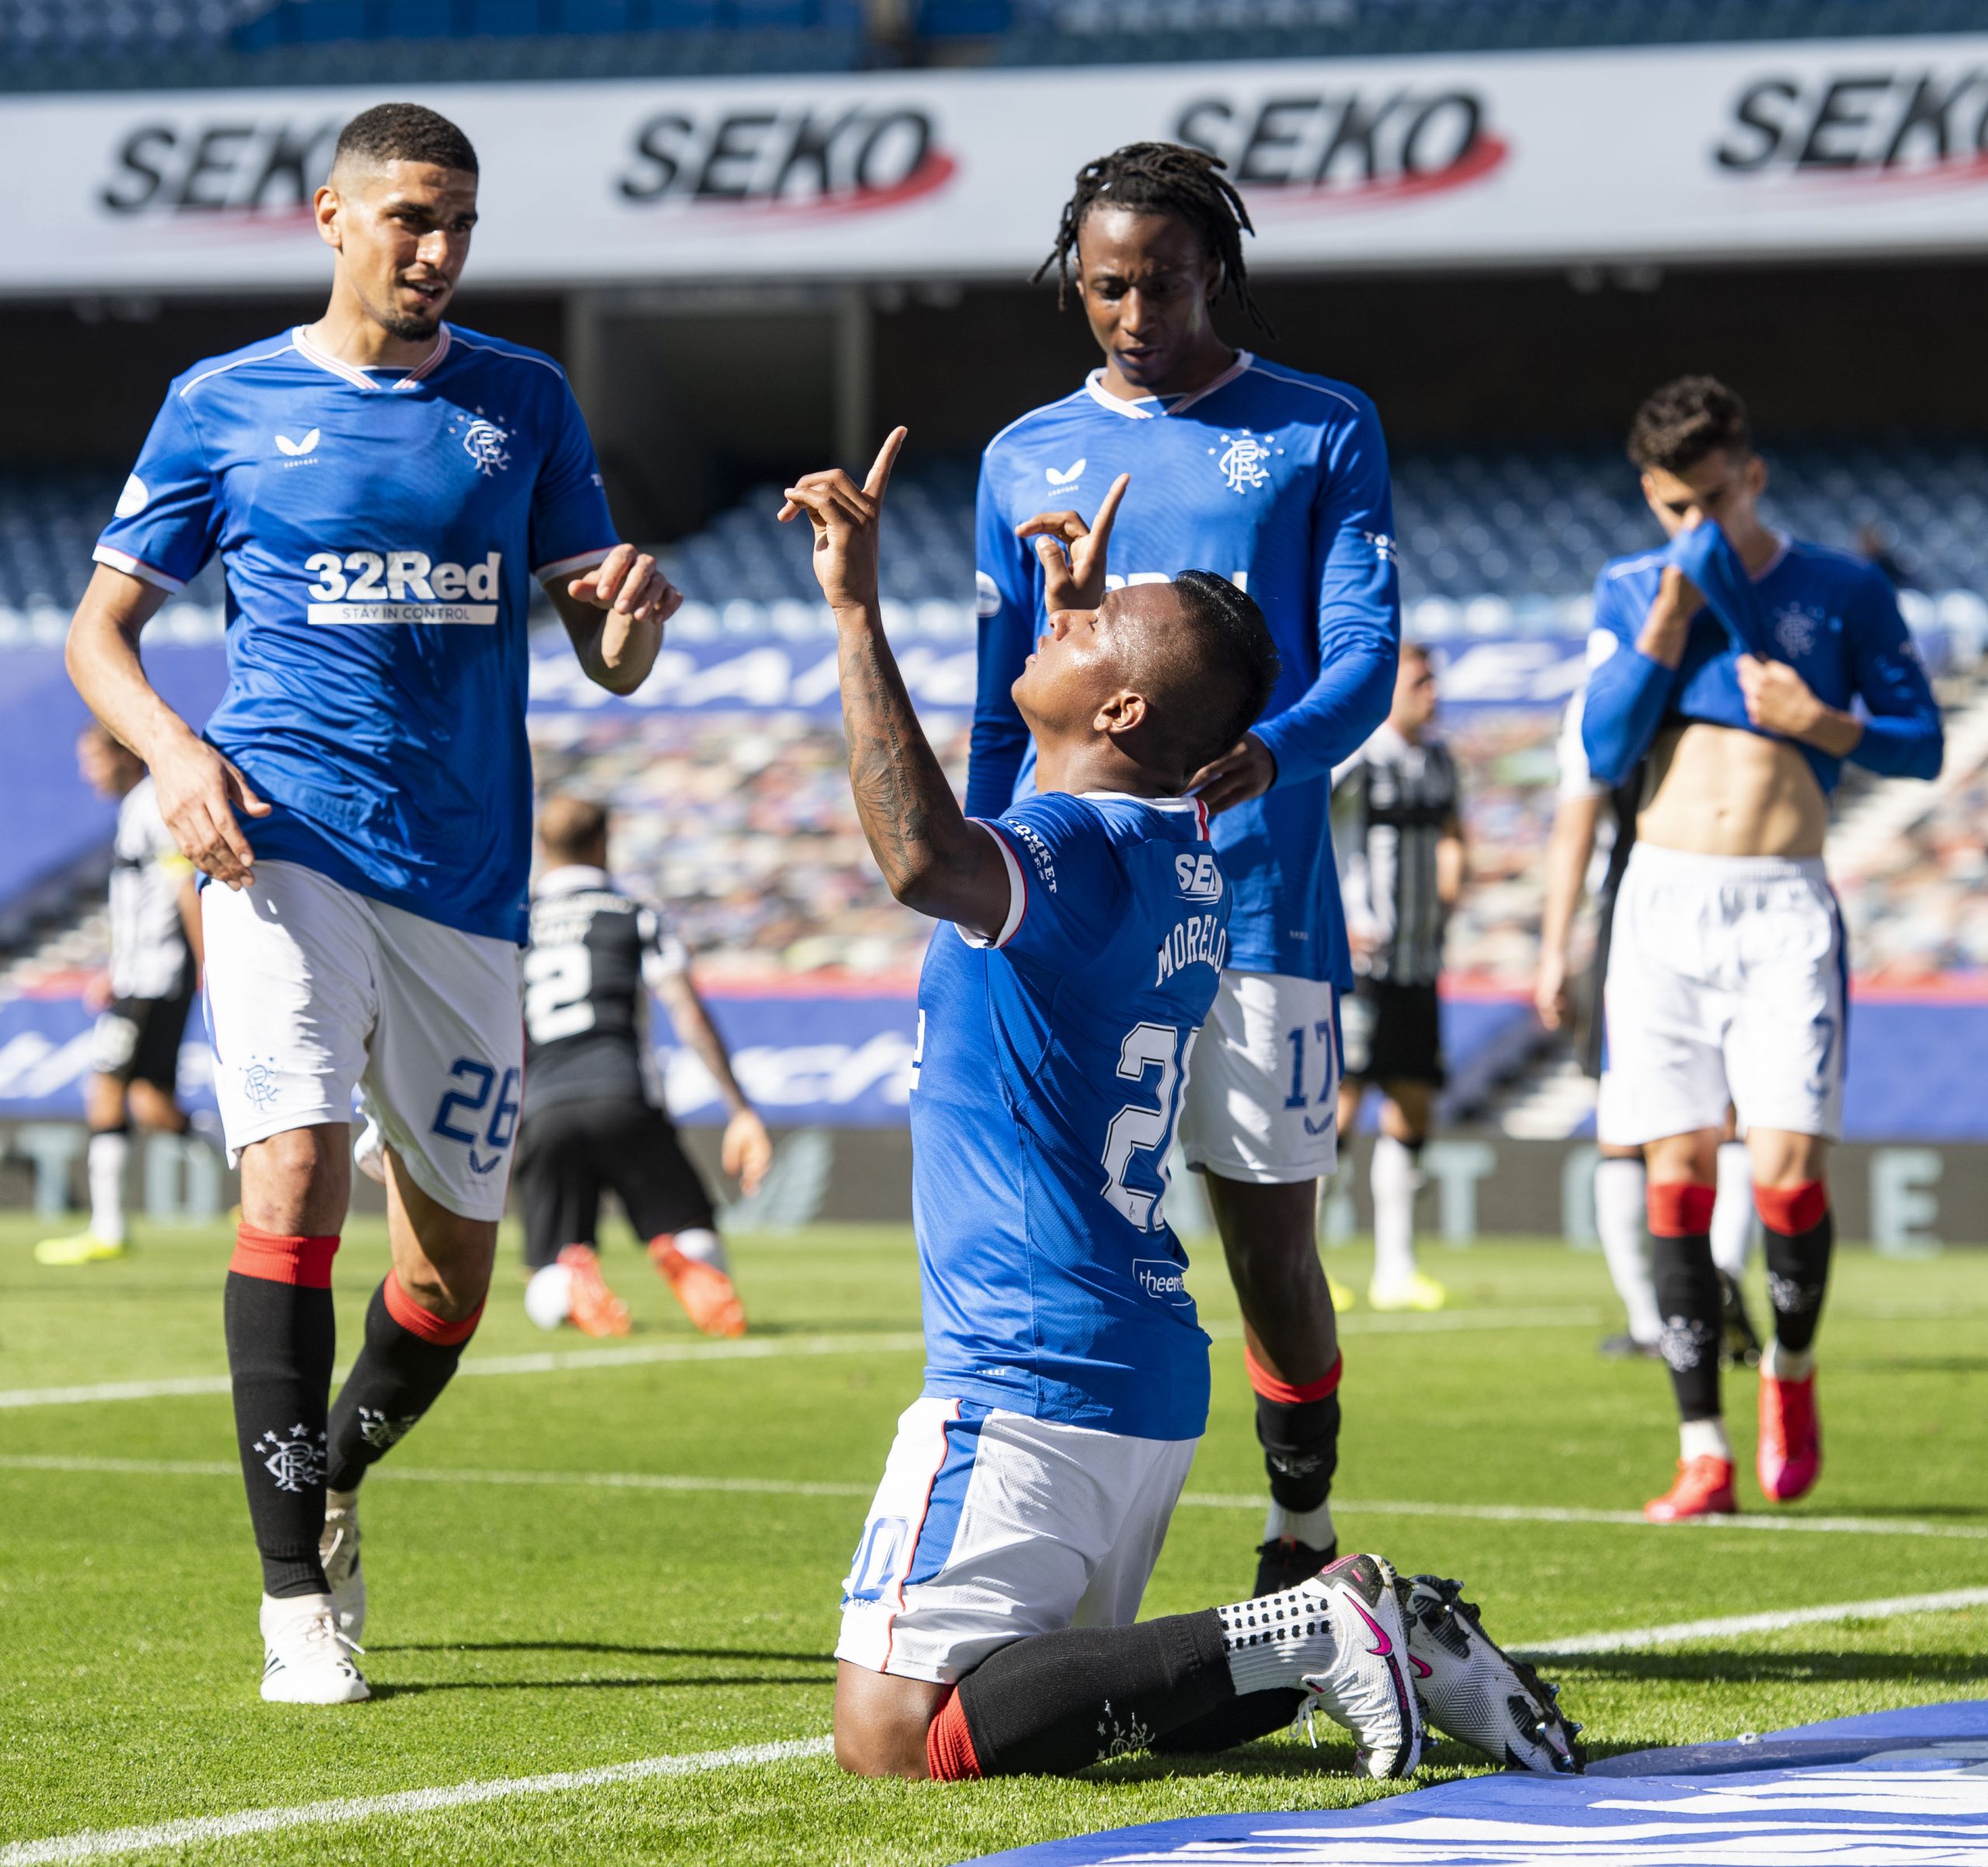 GLASGOW, SCOTLAND - AUGUST 09: Alfredo Morelos of Rangers FC celebrates after scoring his team's second goal during the Ladbrokes Scottish Premiership match between Rangers FC and St. Mirren at Ibrox Stadium on August 09, 2020 in Glasgow, Scotland.